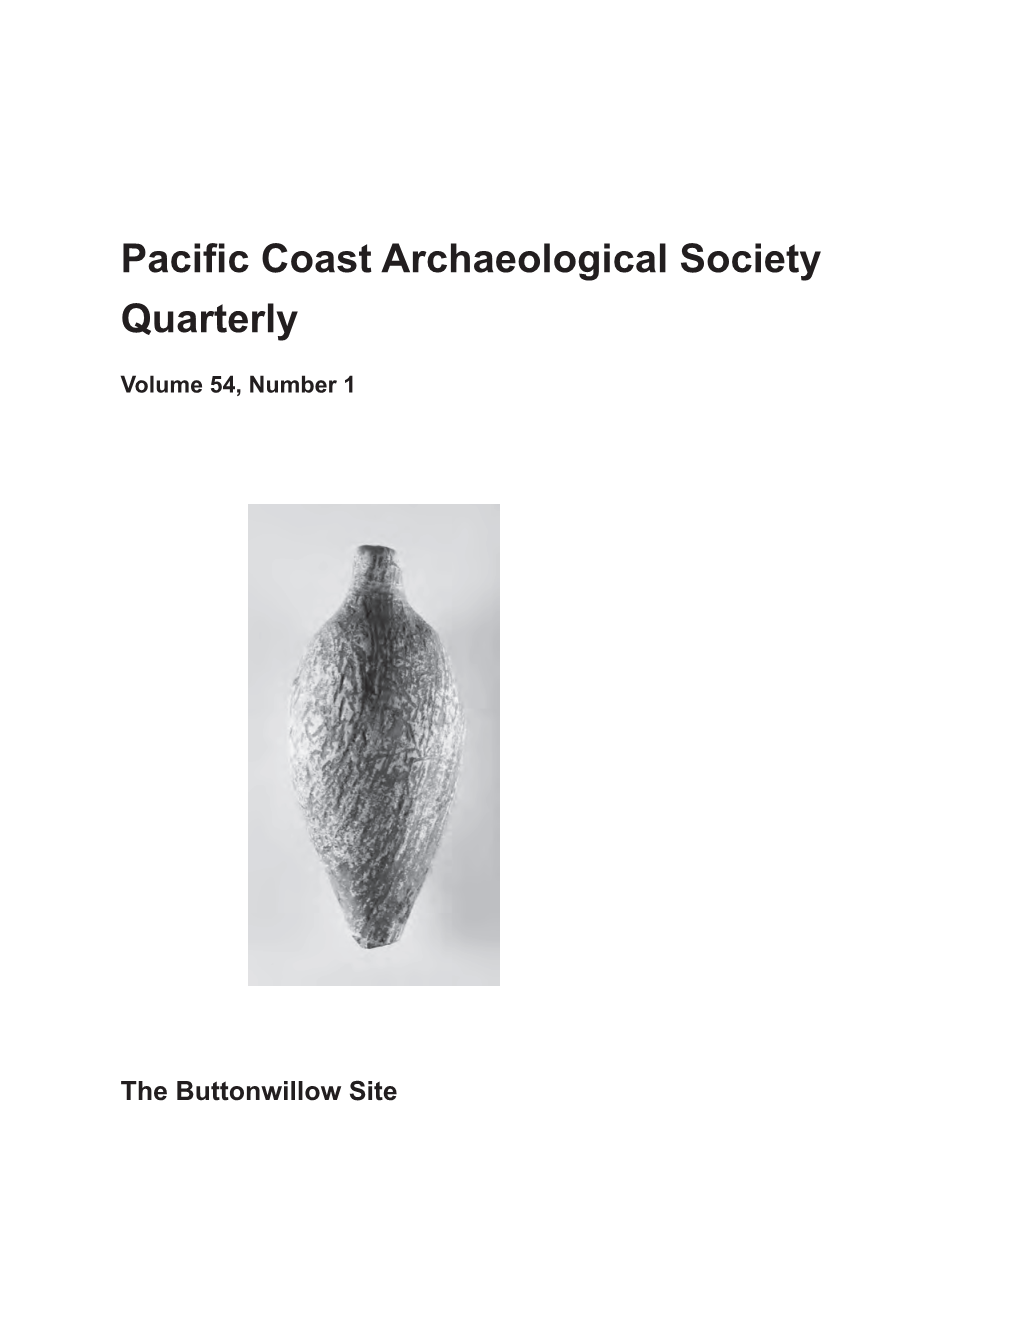 Pacific Coast Archaeological Society Quarterly